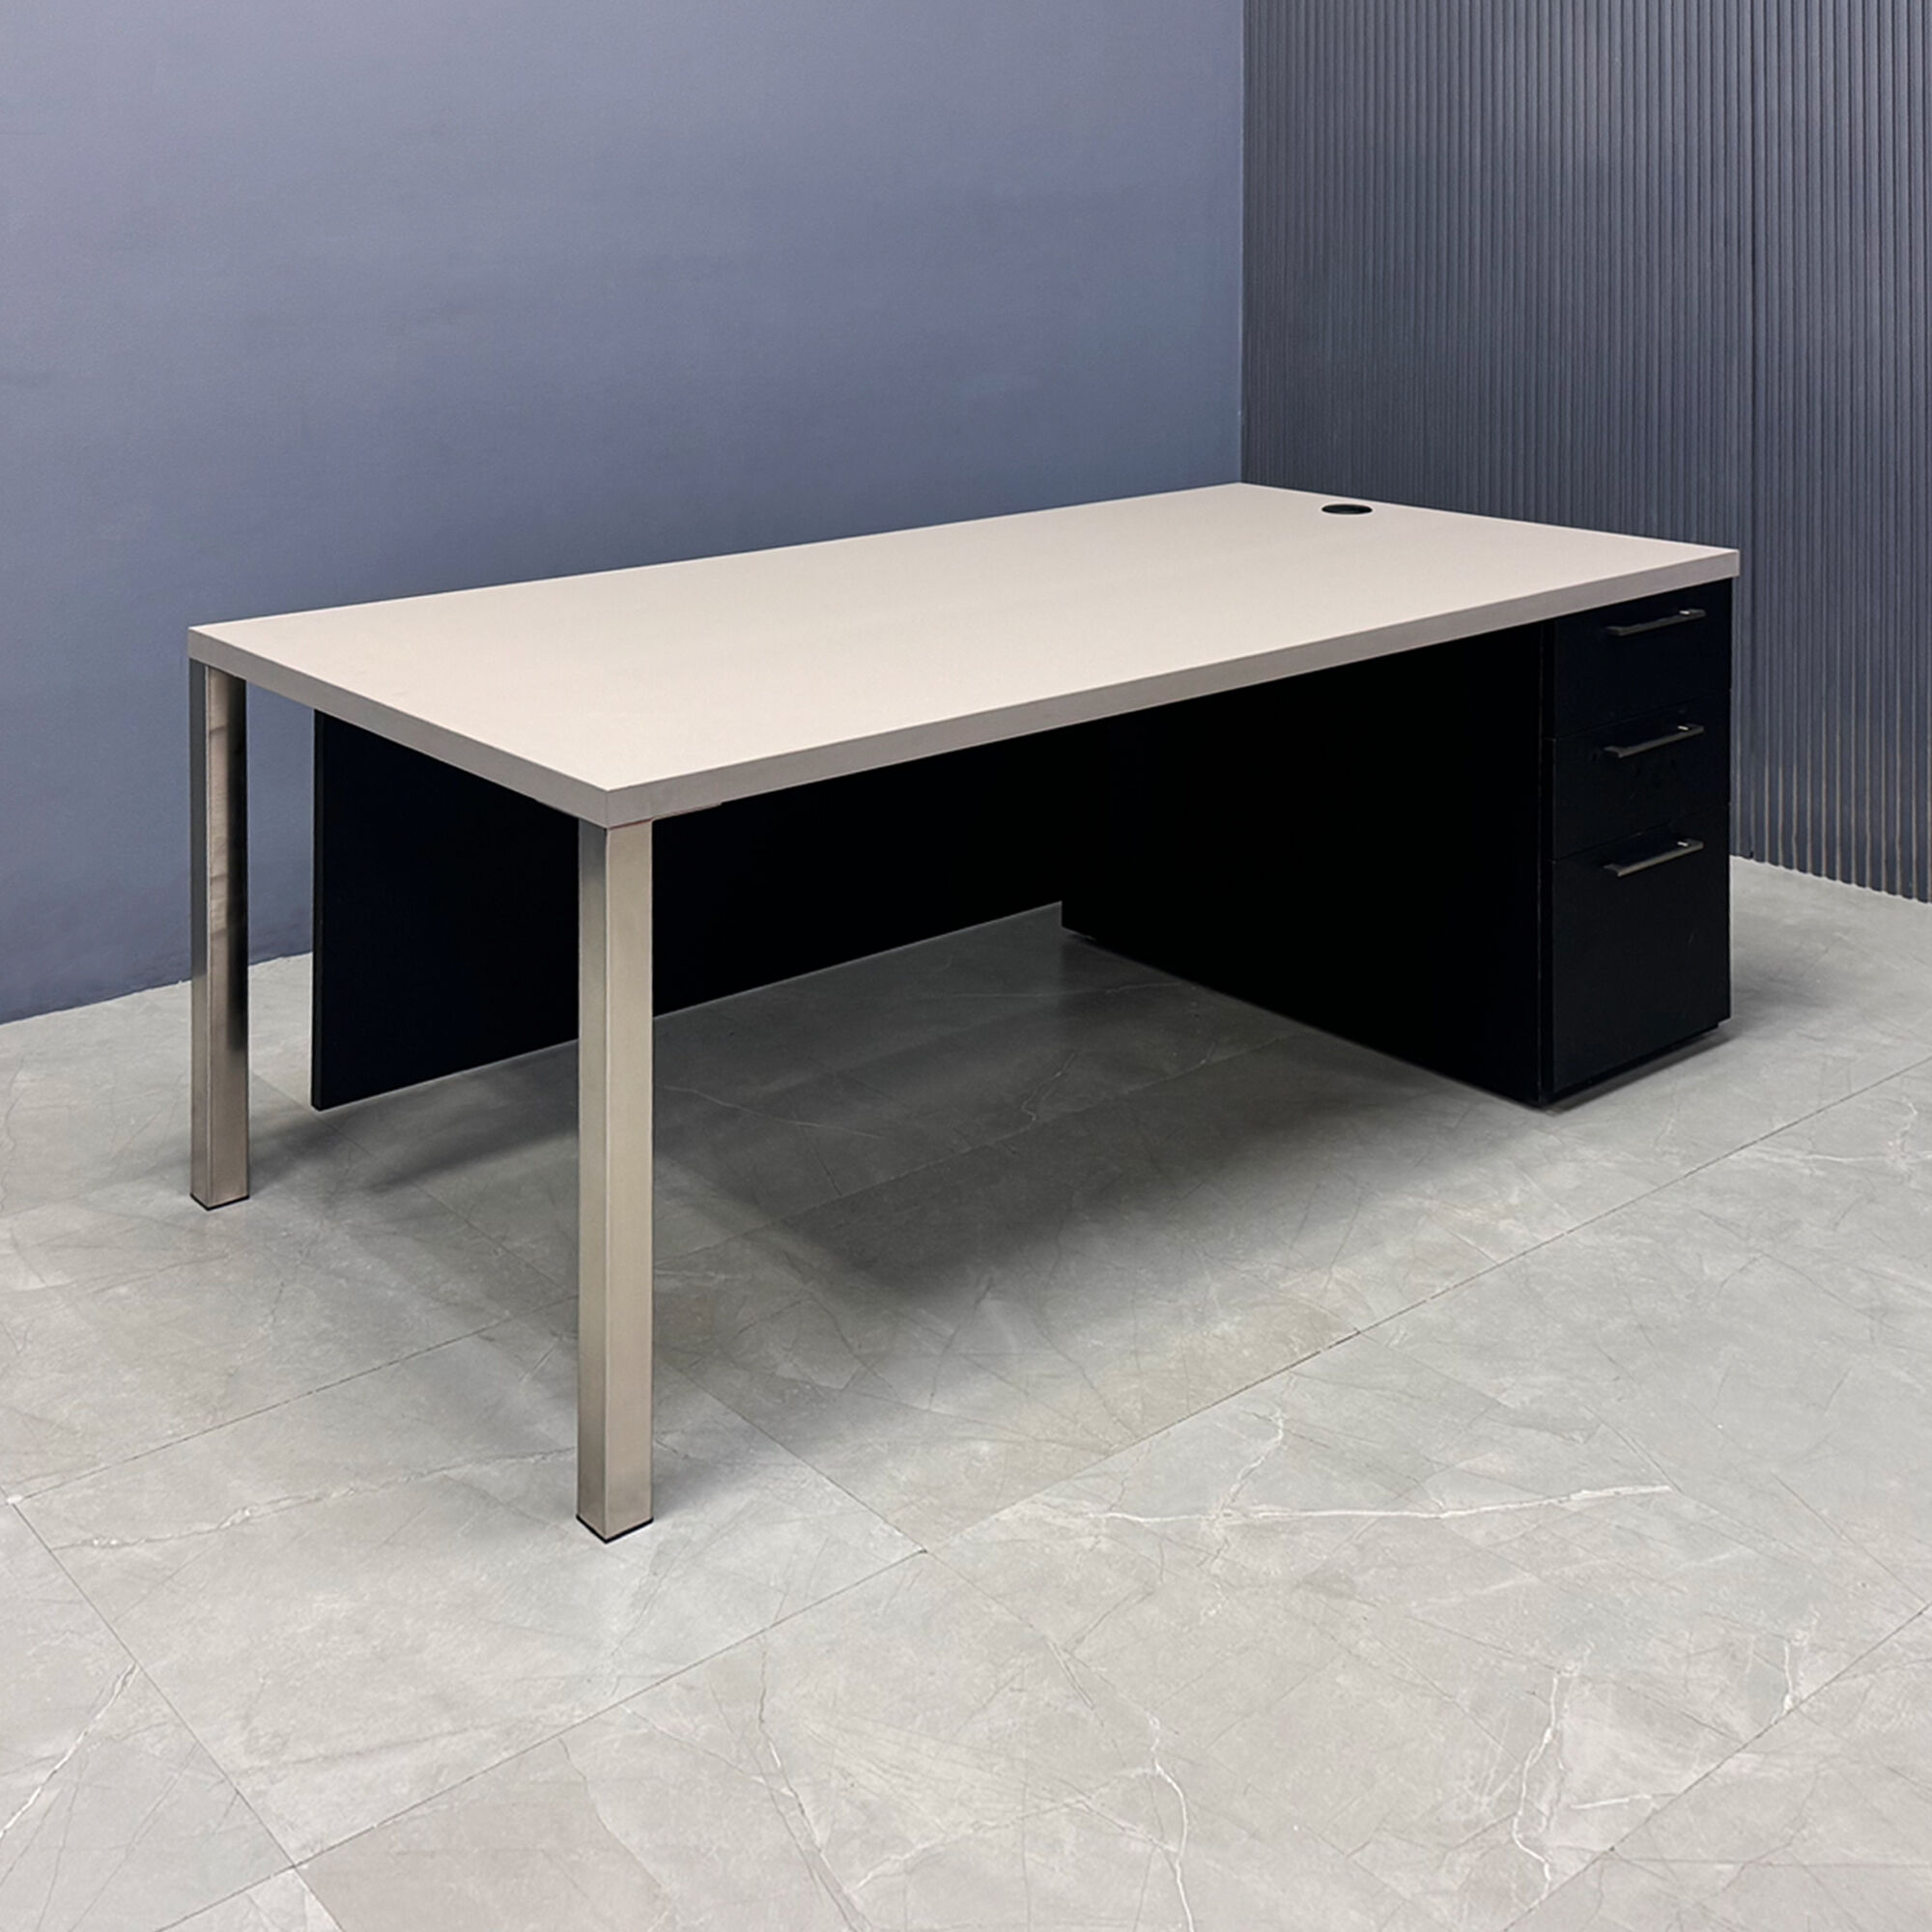 72-inch Dallas Straight Executive Desk W/ Cabinet in beige pvc top, black traceless laminate storage & privacy panel, with brushed aluminum legs, shown here.